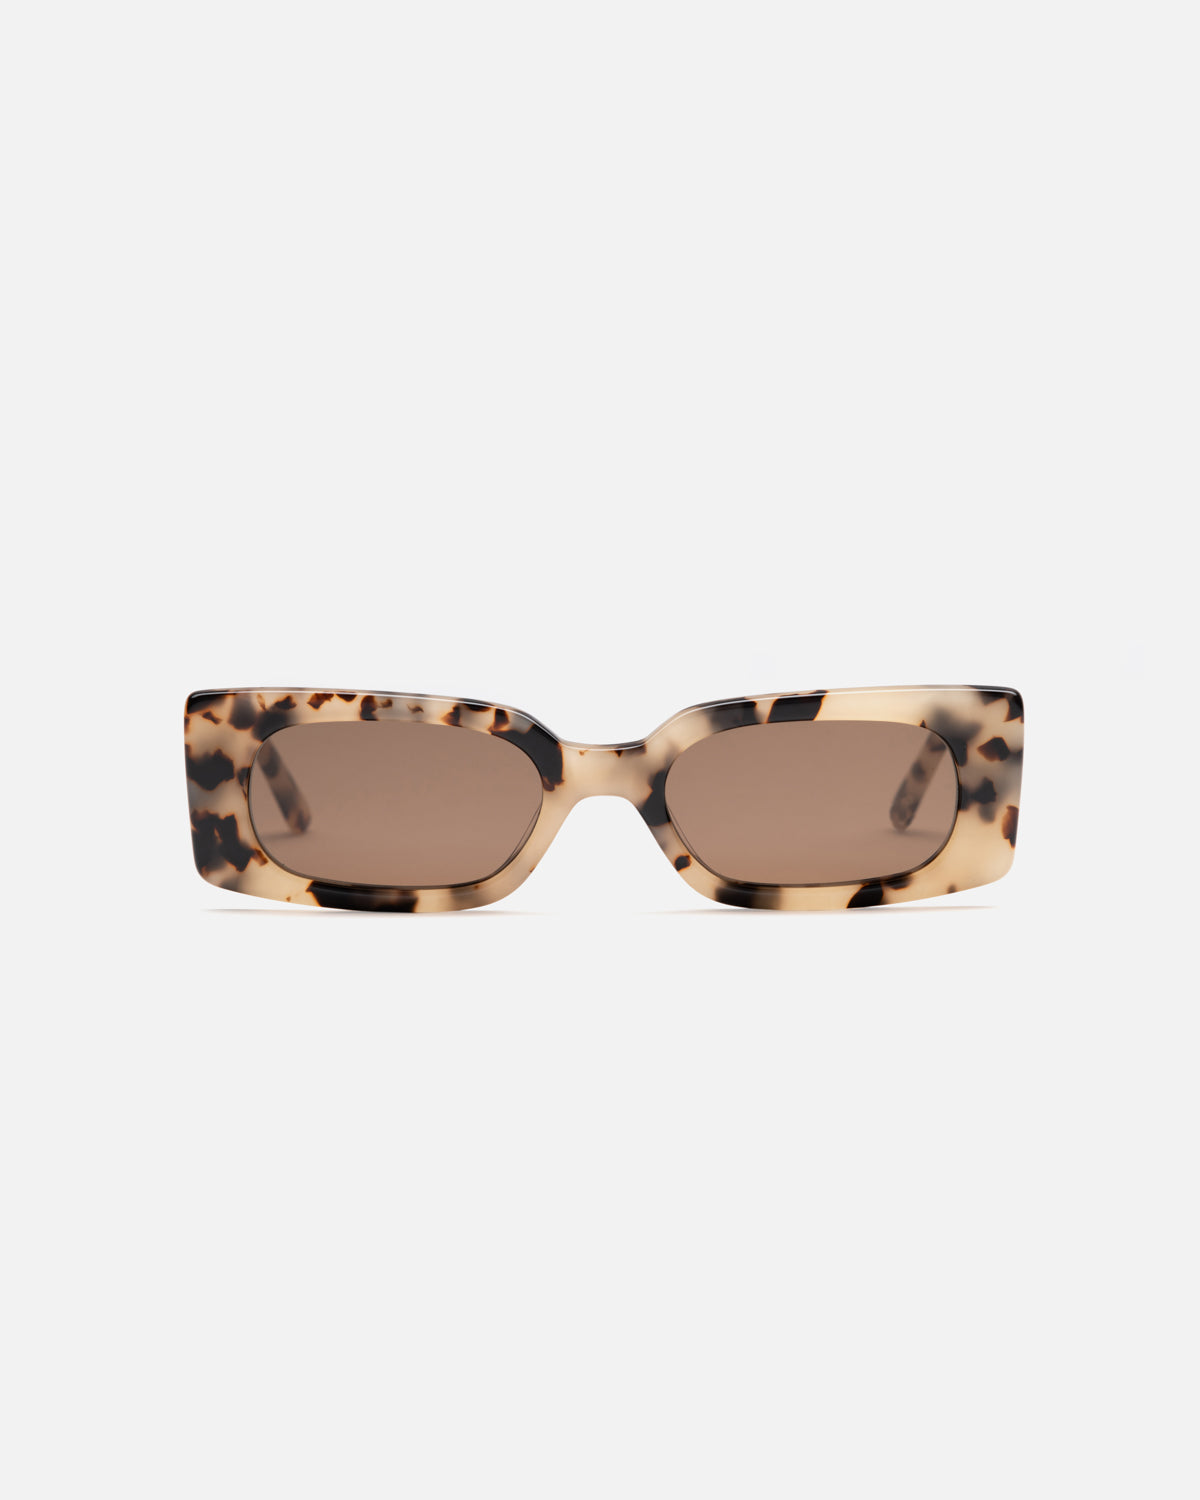 Lu Goldie Salome rectangle Sunglasses in choc tortoise shell acetate with brown lenses, front